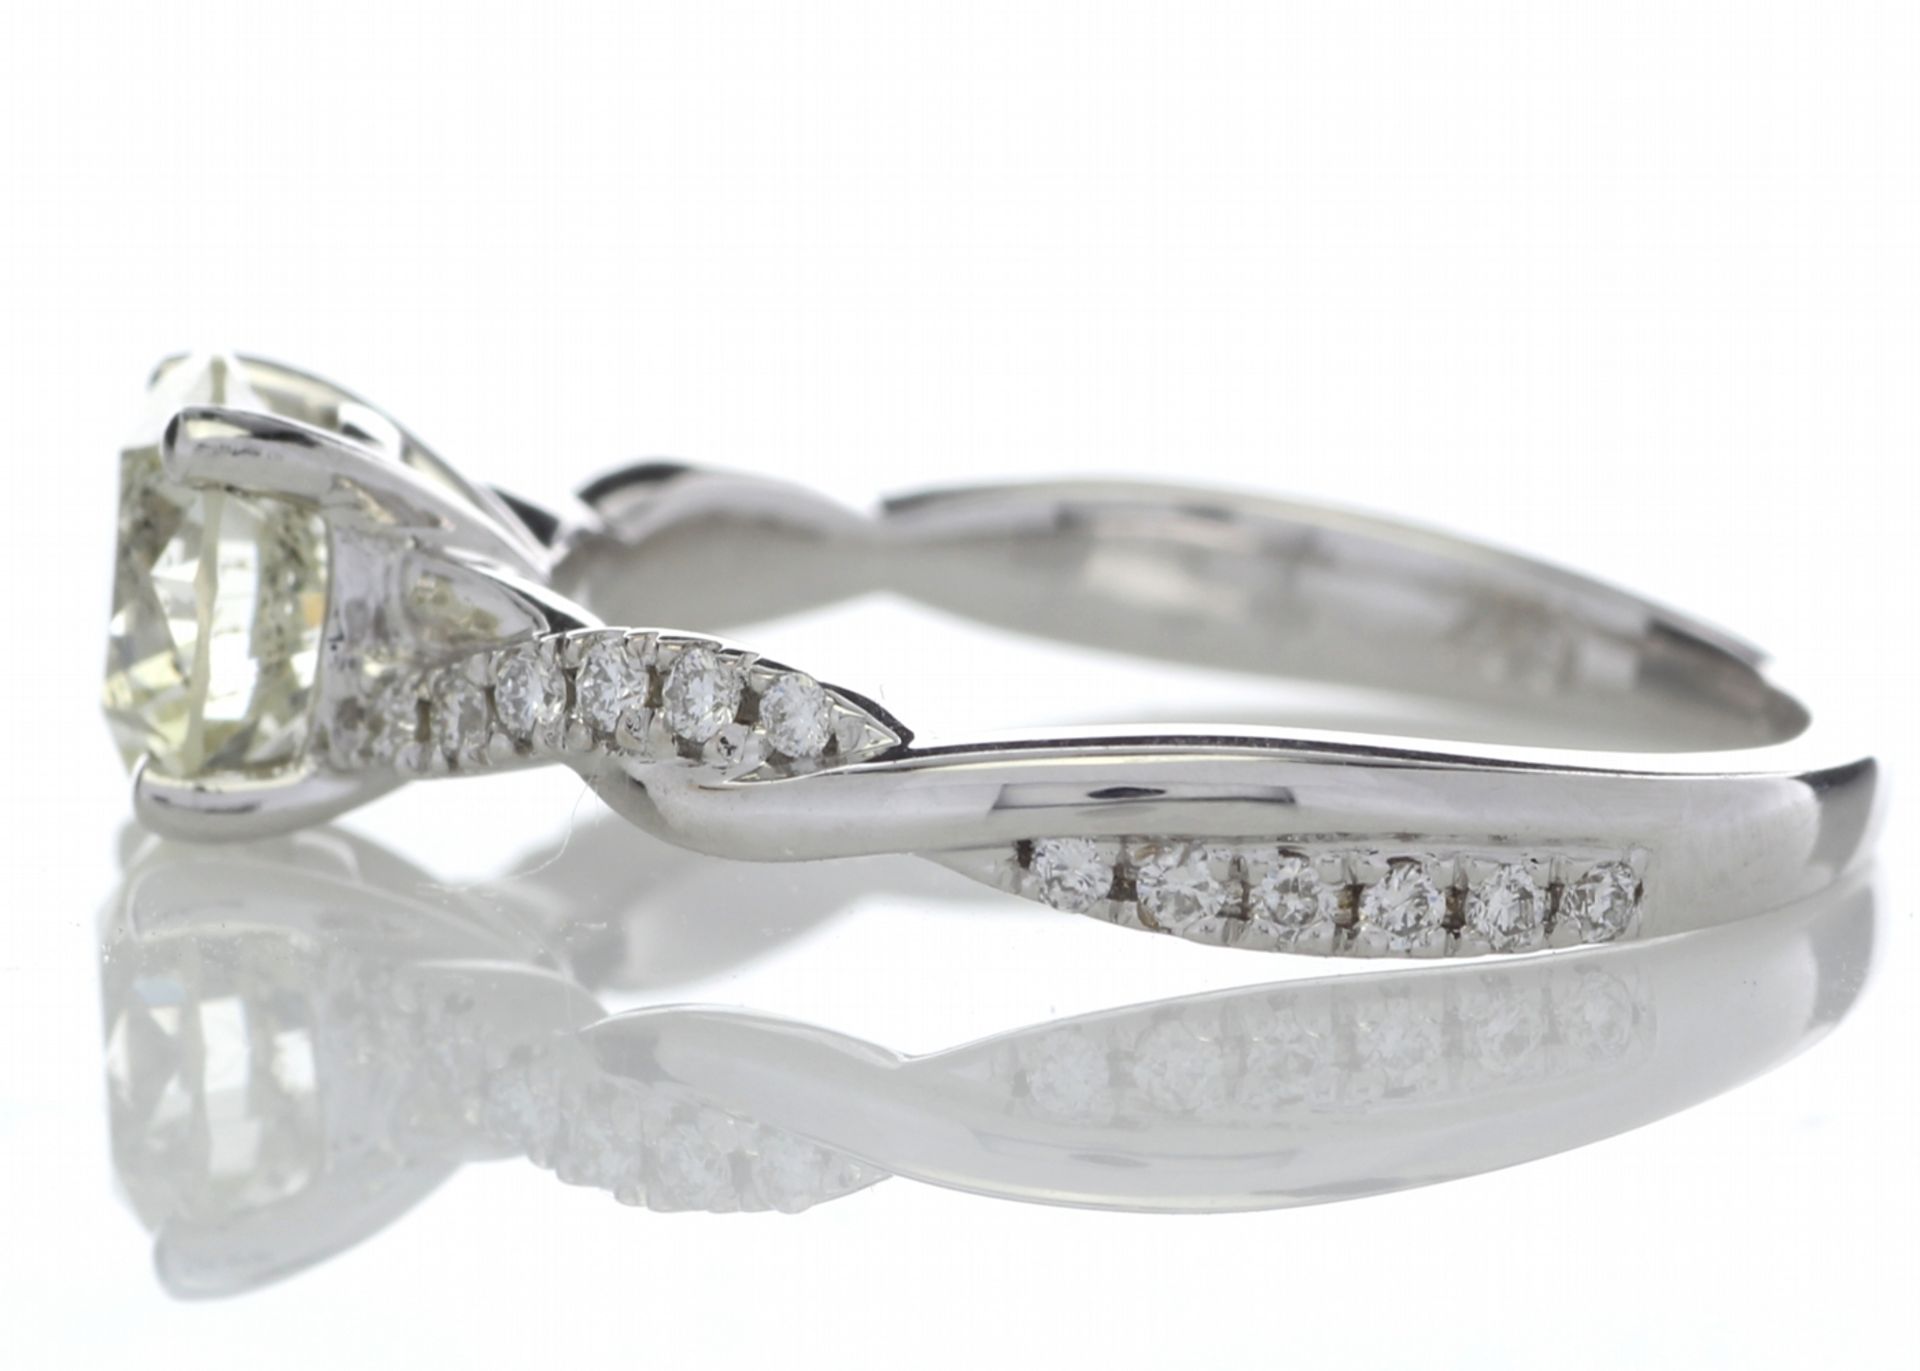 18ct White Gold Diamond Ring With Waved Stone Set Shoulders 1.22 Carats - Valued By GIE £27,950.00 - - Image 3 of 6